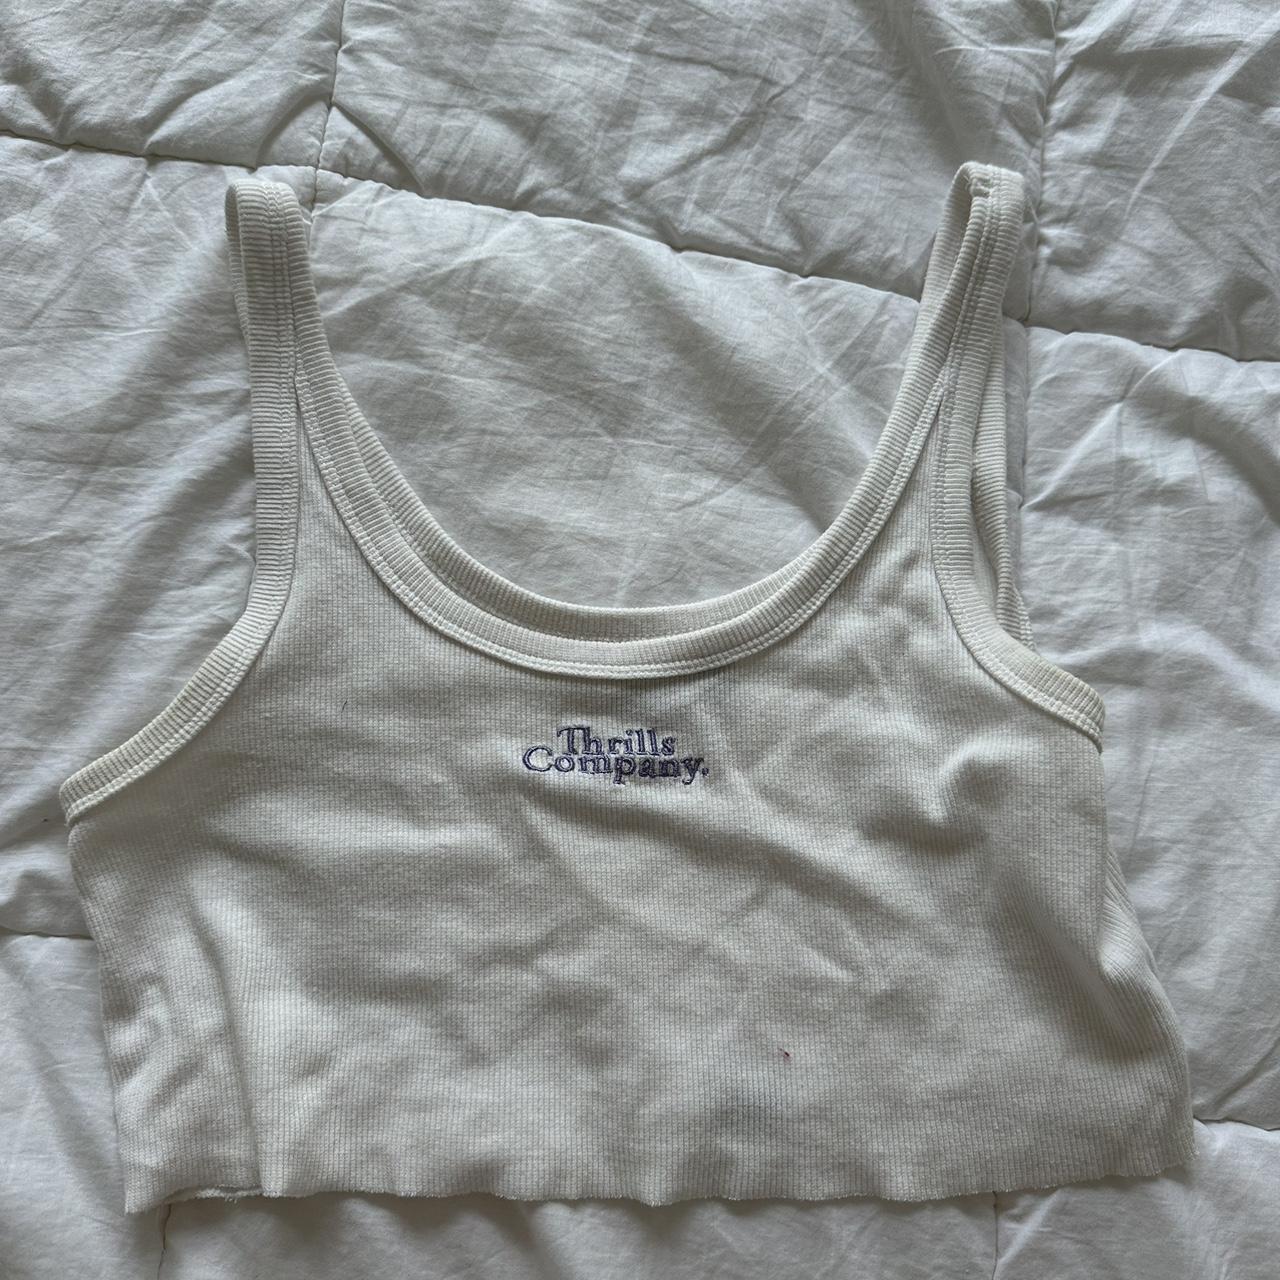 Thrills white tank so cute with a pair of jeans or... - Depop